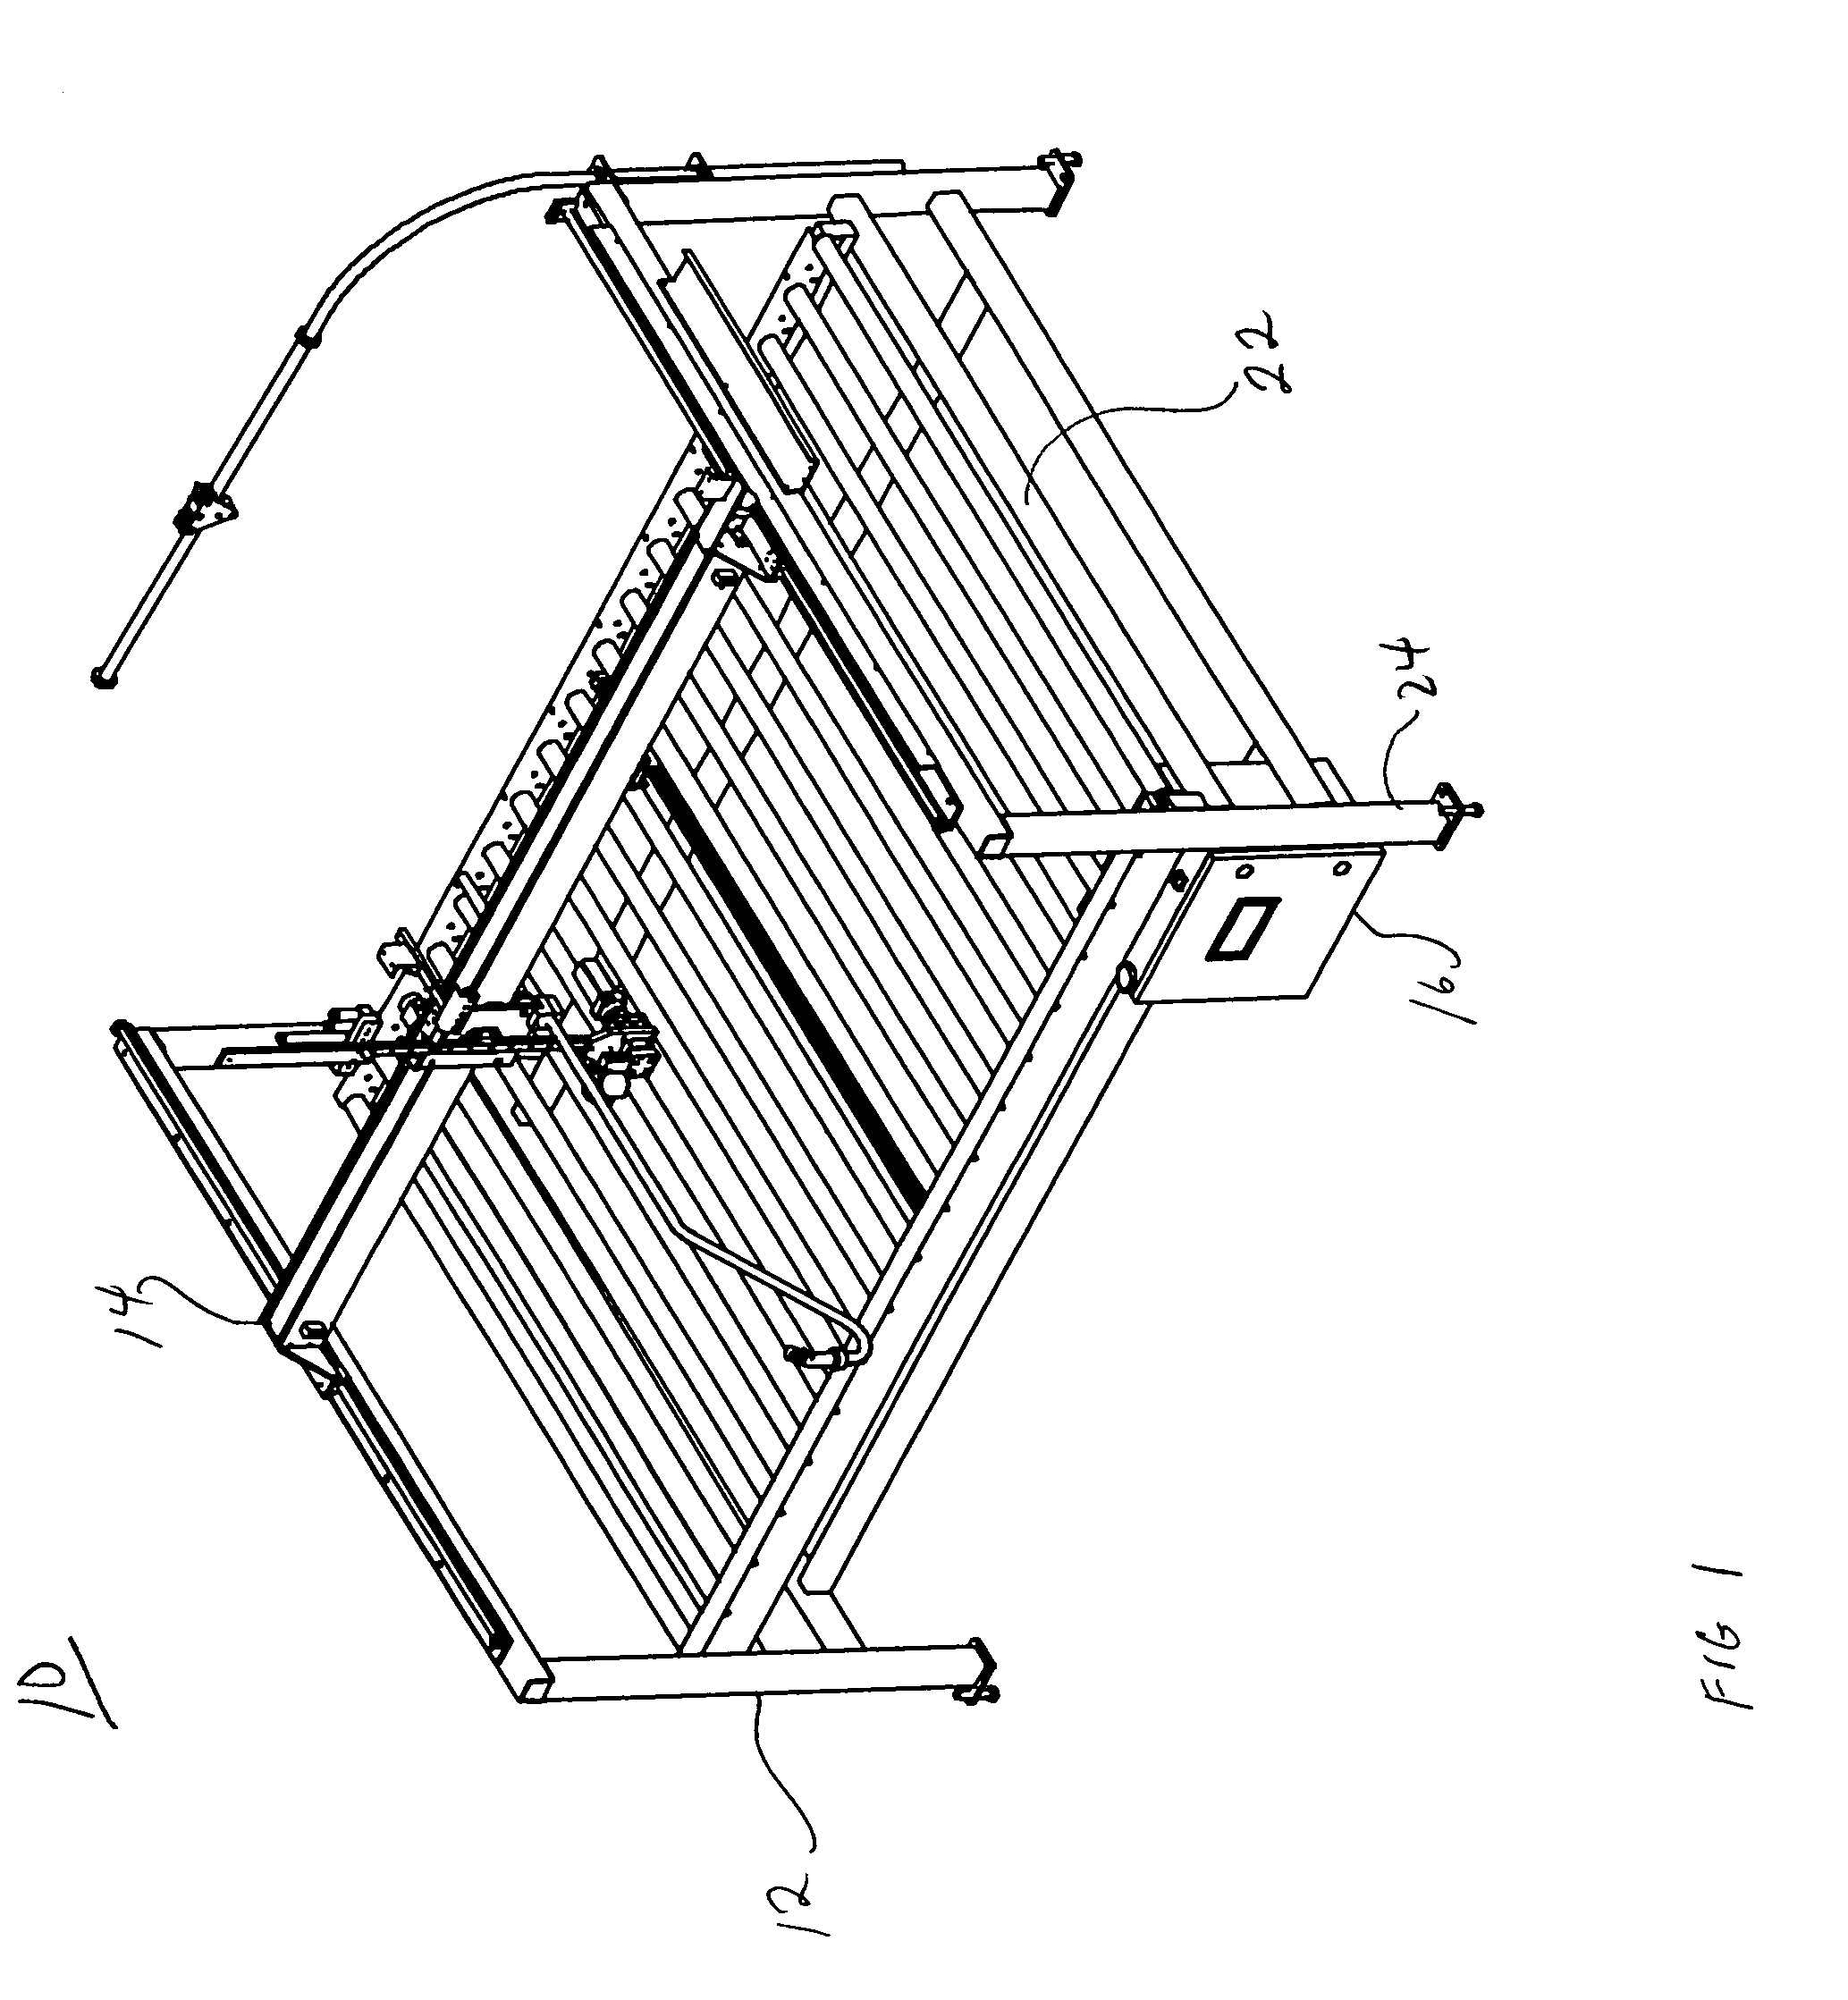 System and process for glazing glass to windows and door frames